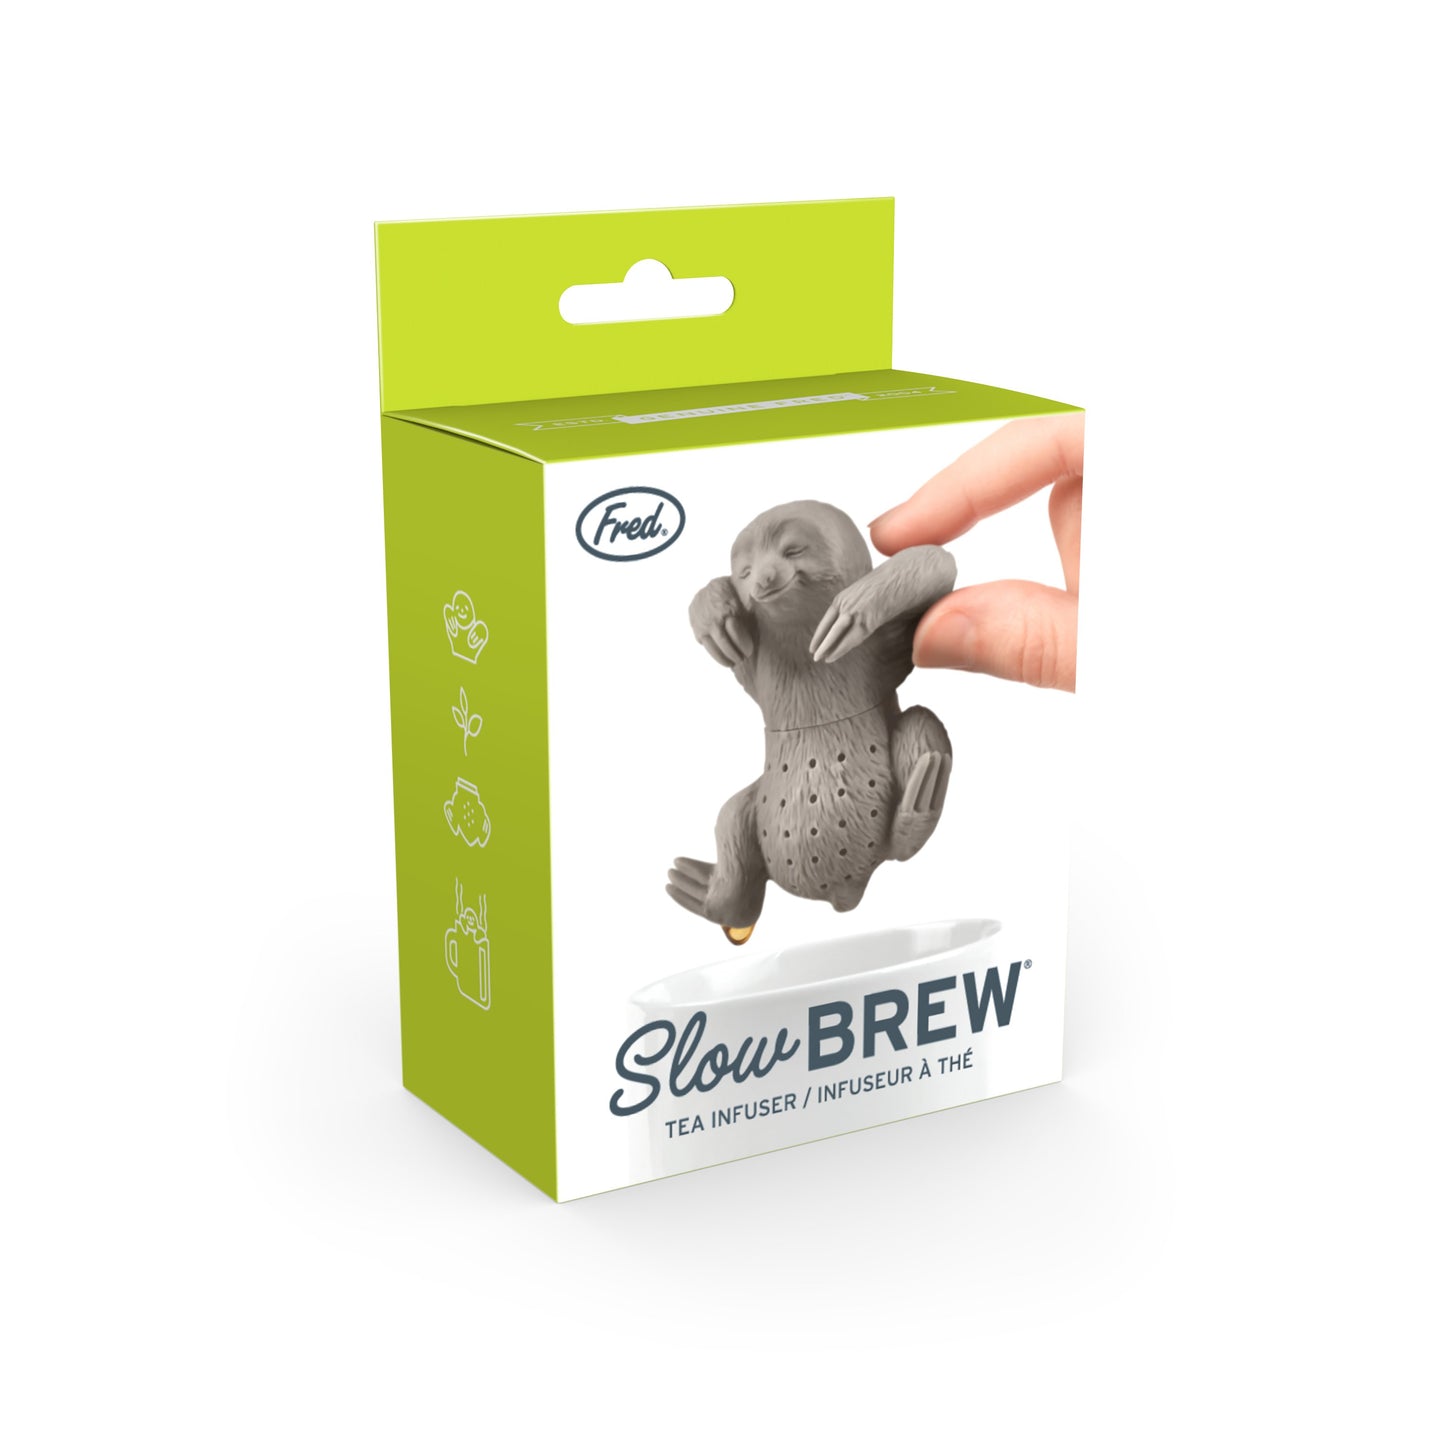 Fred - Slow Brew Infuser